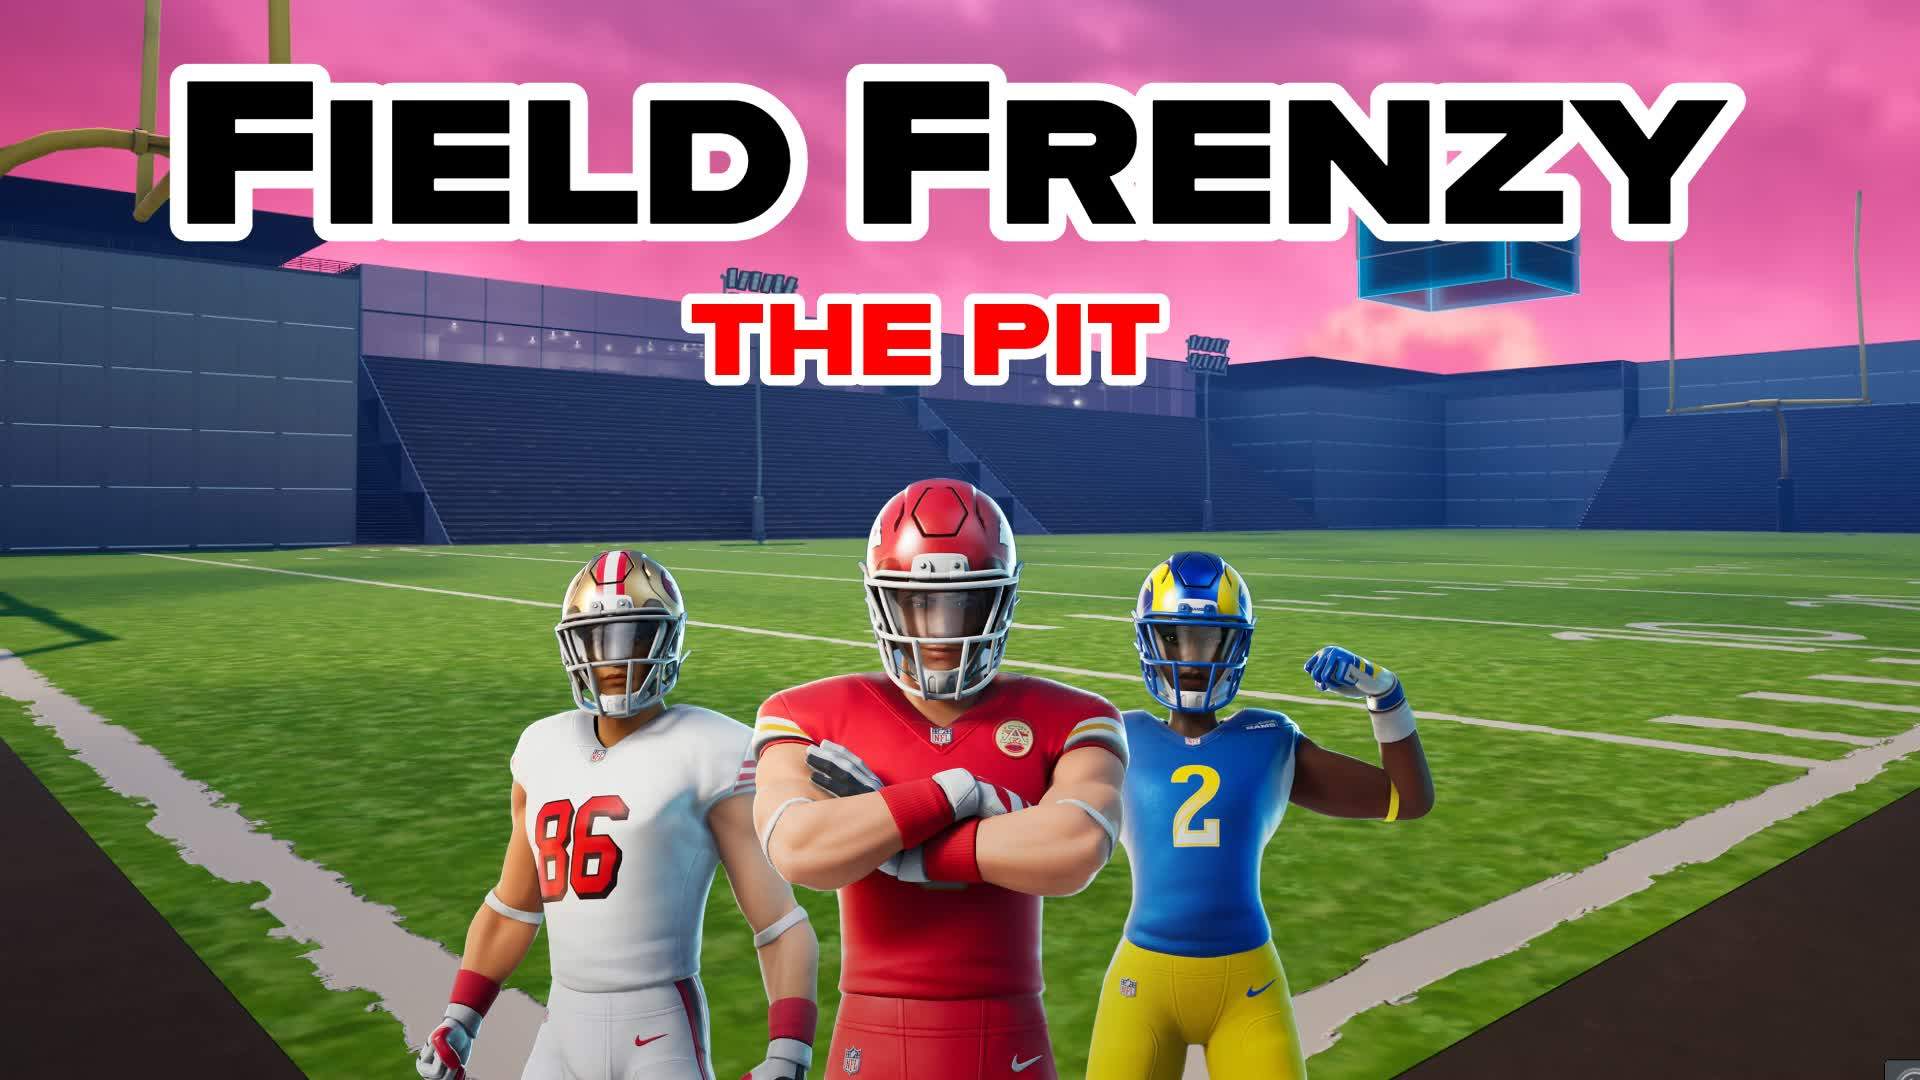 Field of Frenzy - The Pit